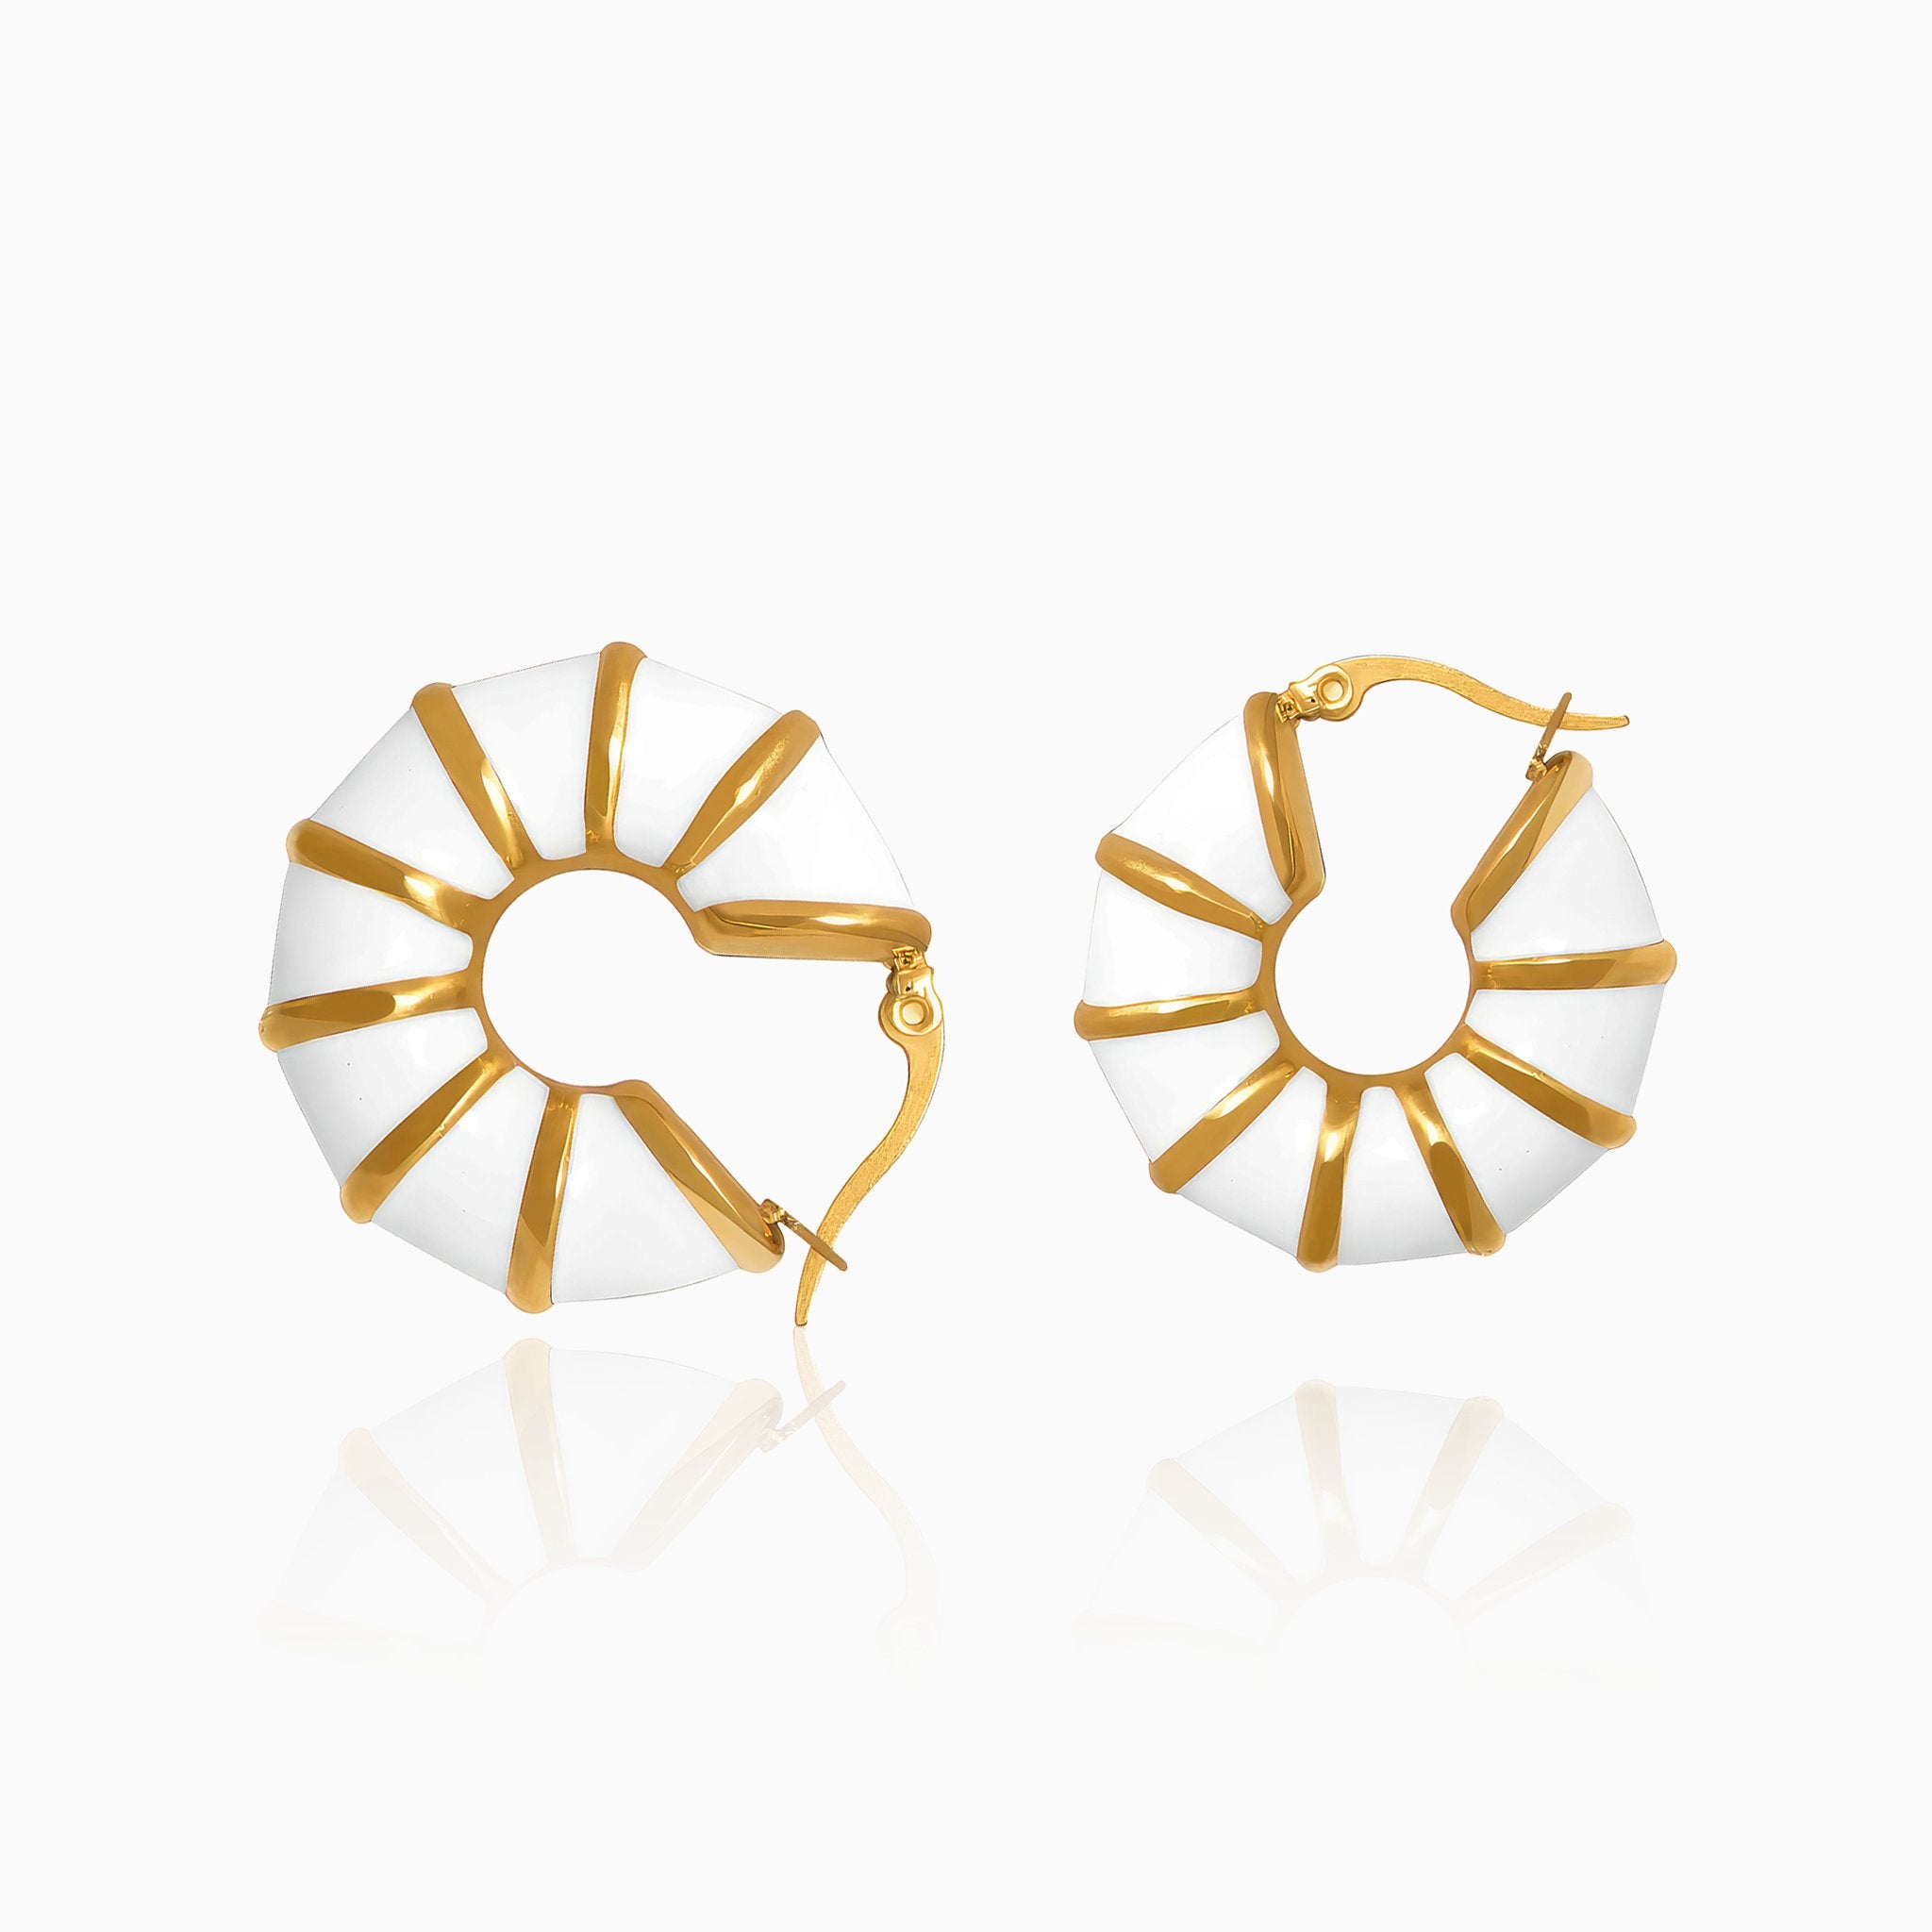 Round Bamboo Design Earrings - Nobbier - Earrings - 18K Gold And Titanium PVD Coated Jewelry